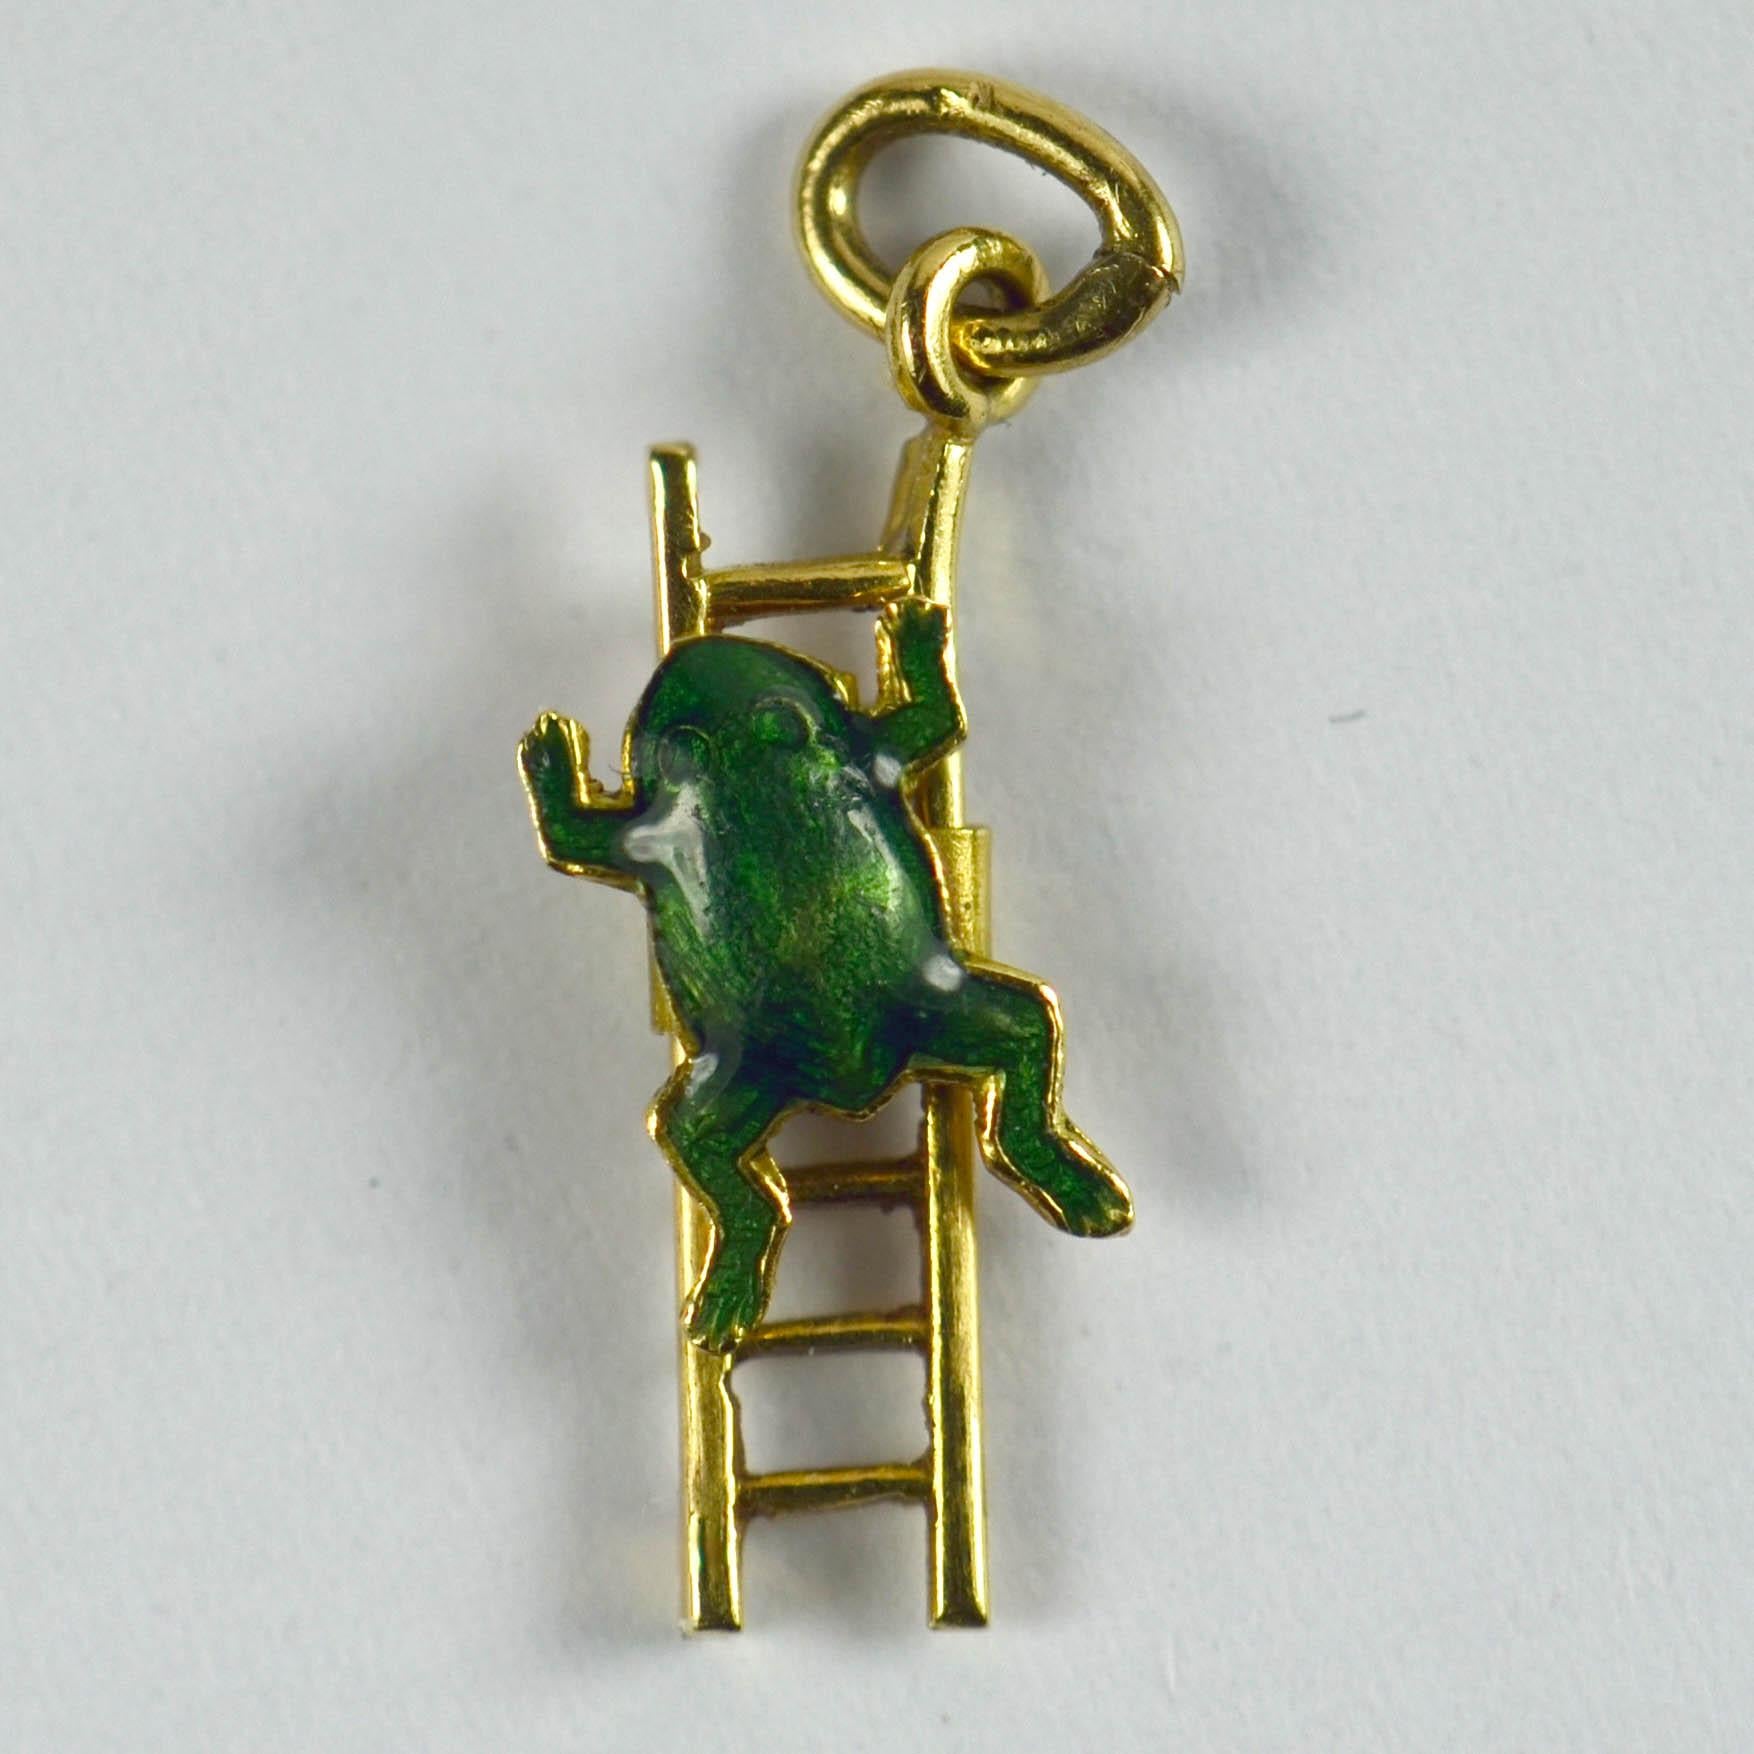 An 18 karat yellow gold charm pendant designed as a ladder with a moving green enamel frog on it. The frog slides up and down the ladder.

Dimensions: 2 x 0.5 x 0.3 cm
Weight: 0.52 grams